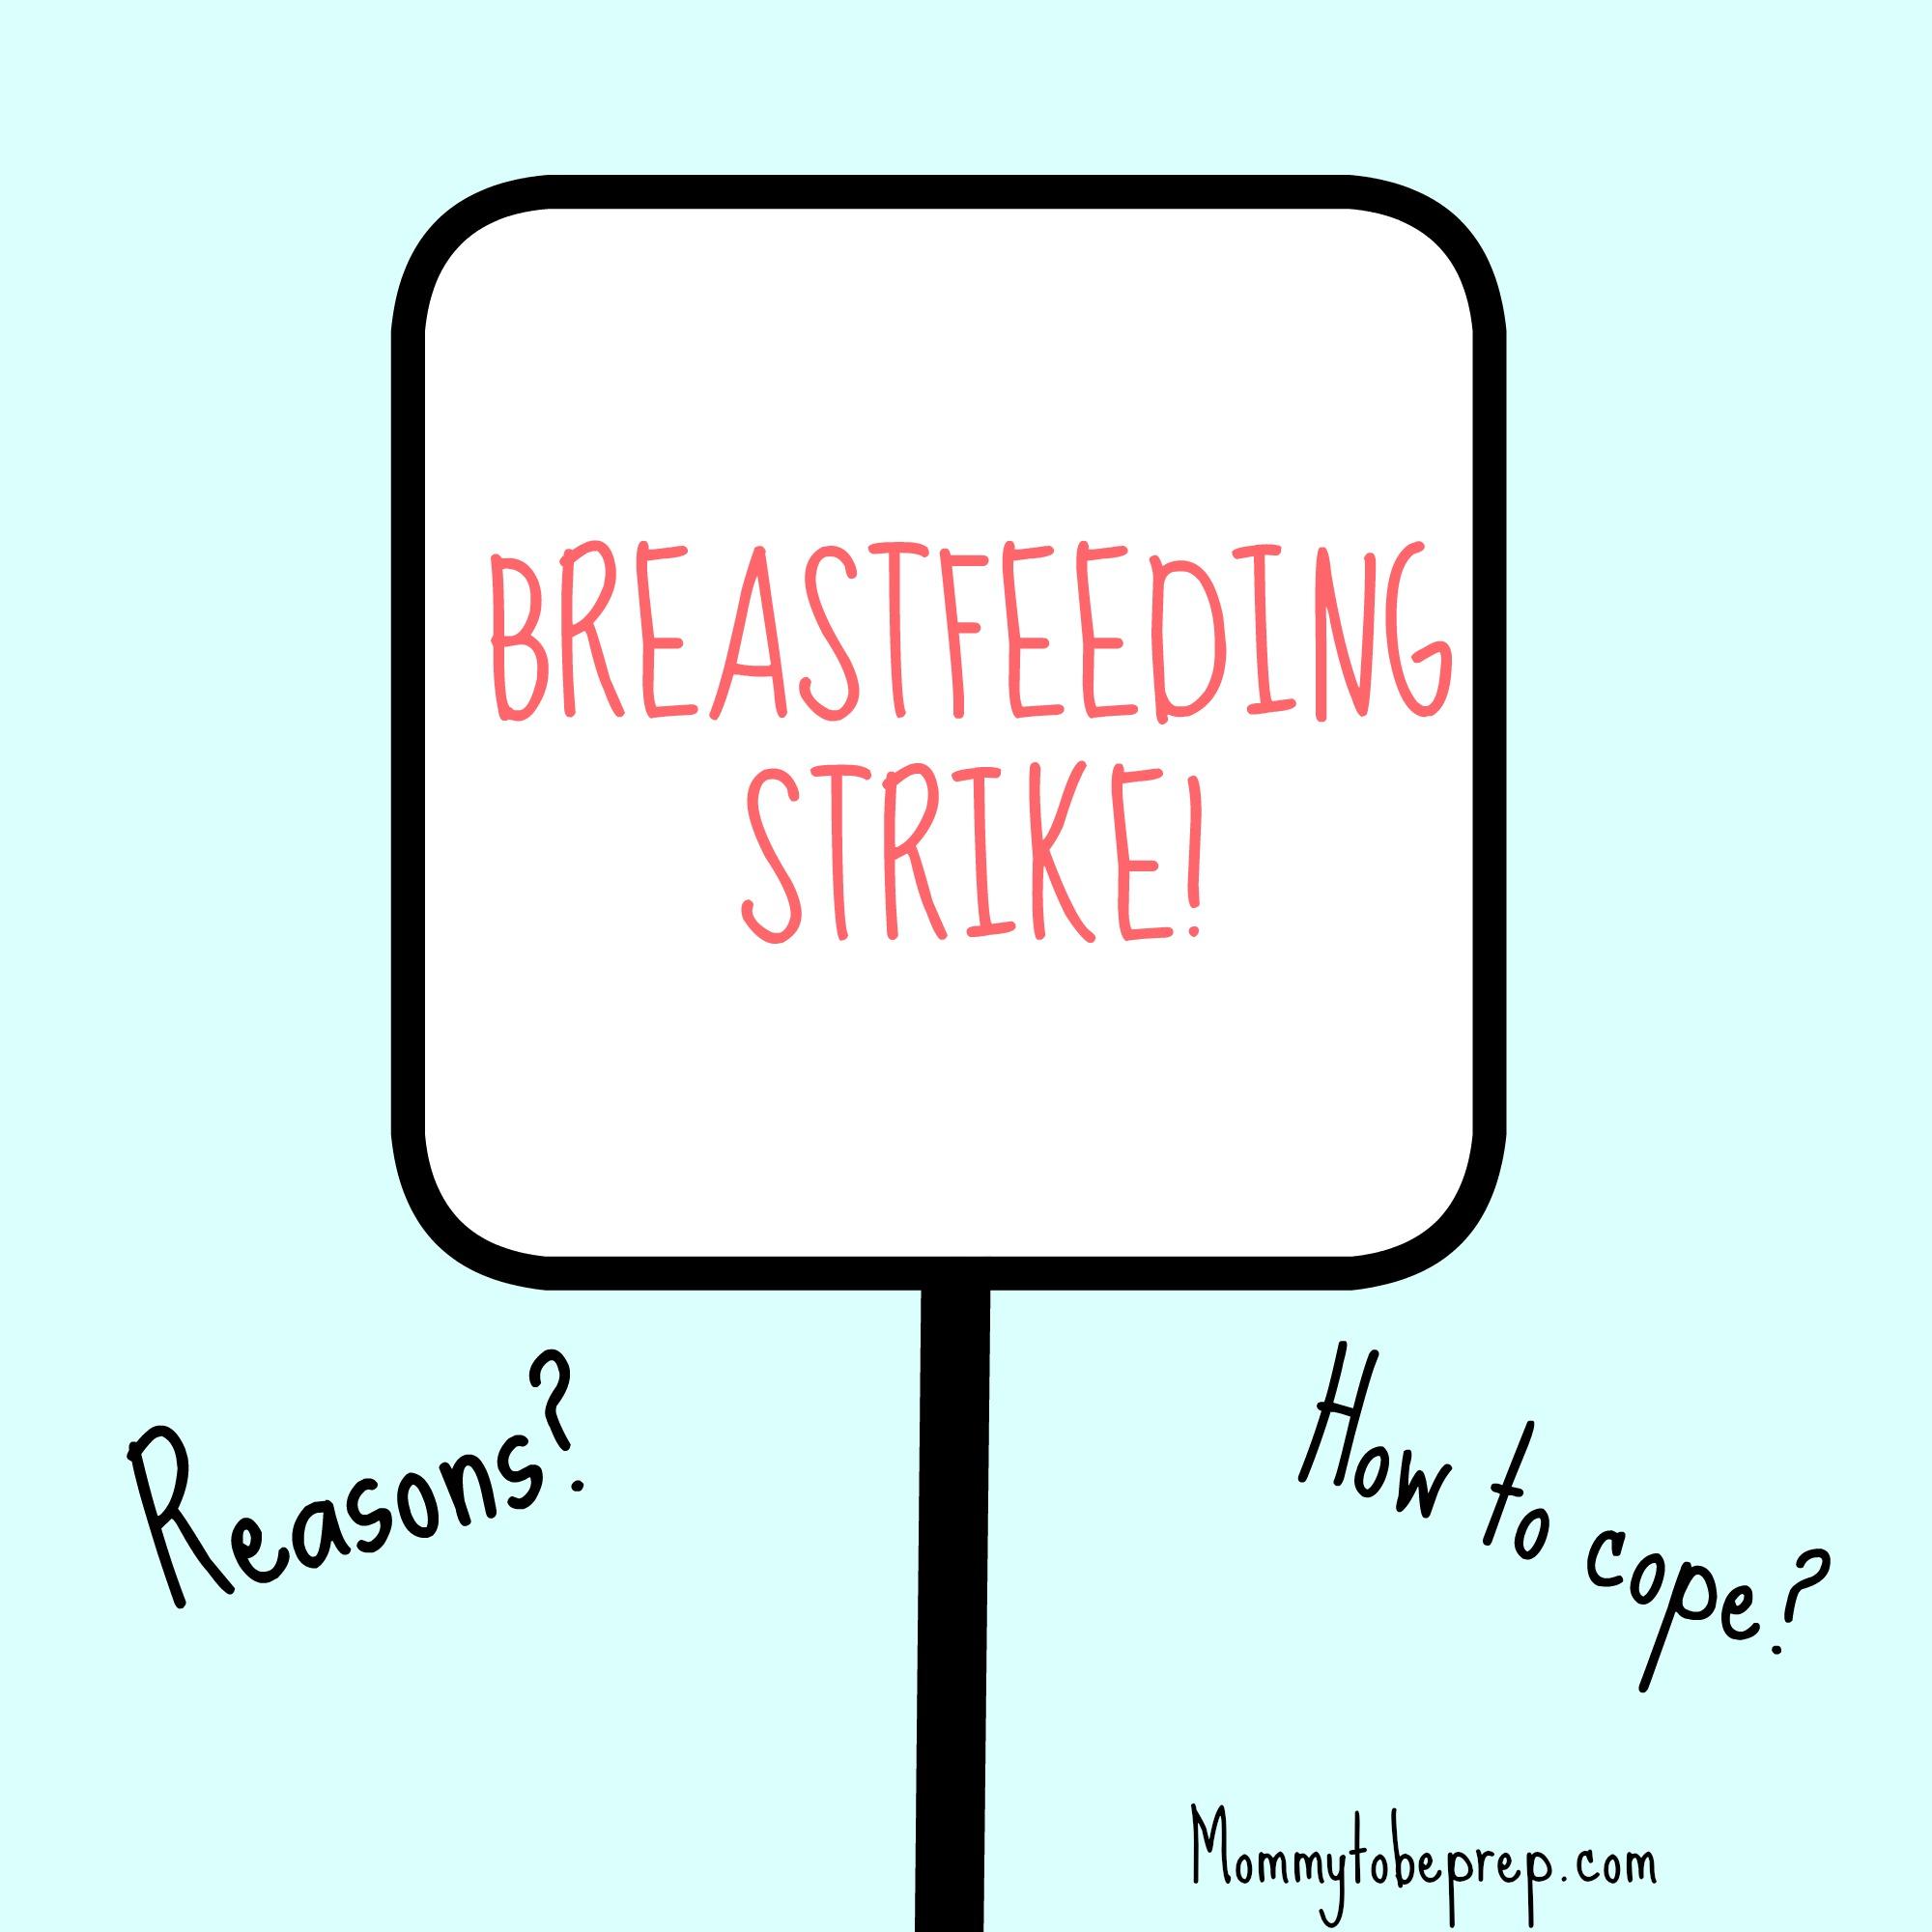 Baby Chooses to go on Strike From Breastfeeding